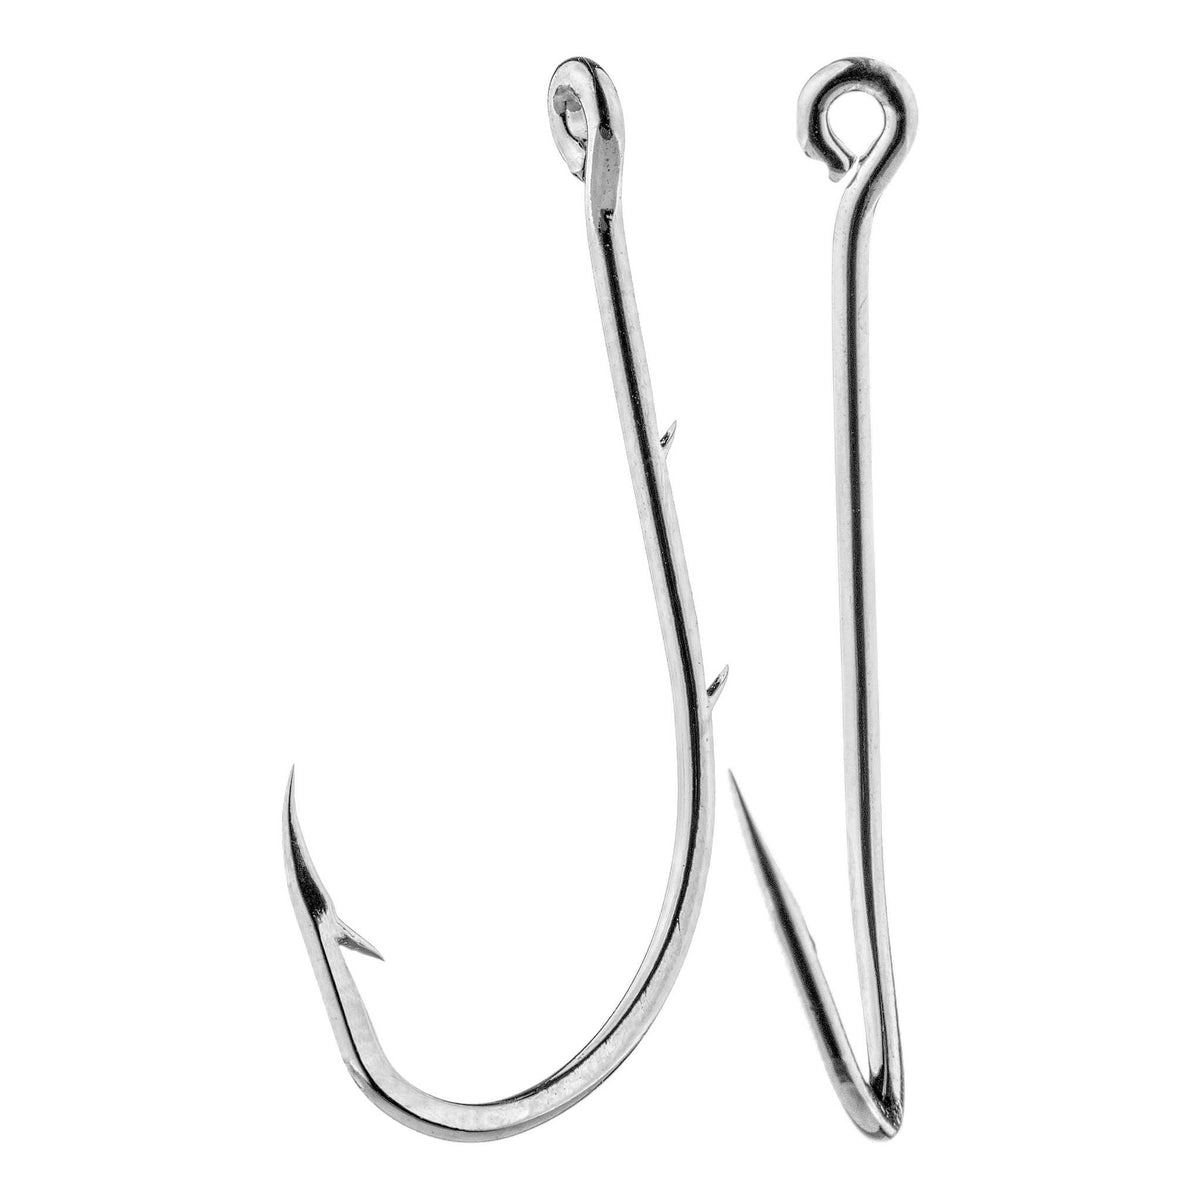 Stainless Steel Hook Flies Set 200ppch Small Squid Hook With Umbrella Crown  P1 P8 Spain Chile Bait Accessories For Jig Pesca Fishing 230718 From  Nian07, $46.94